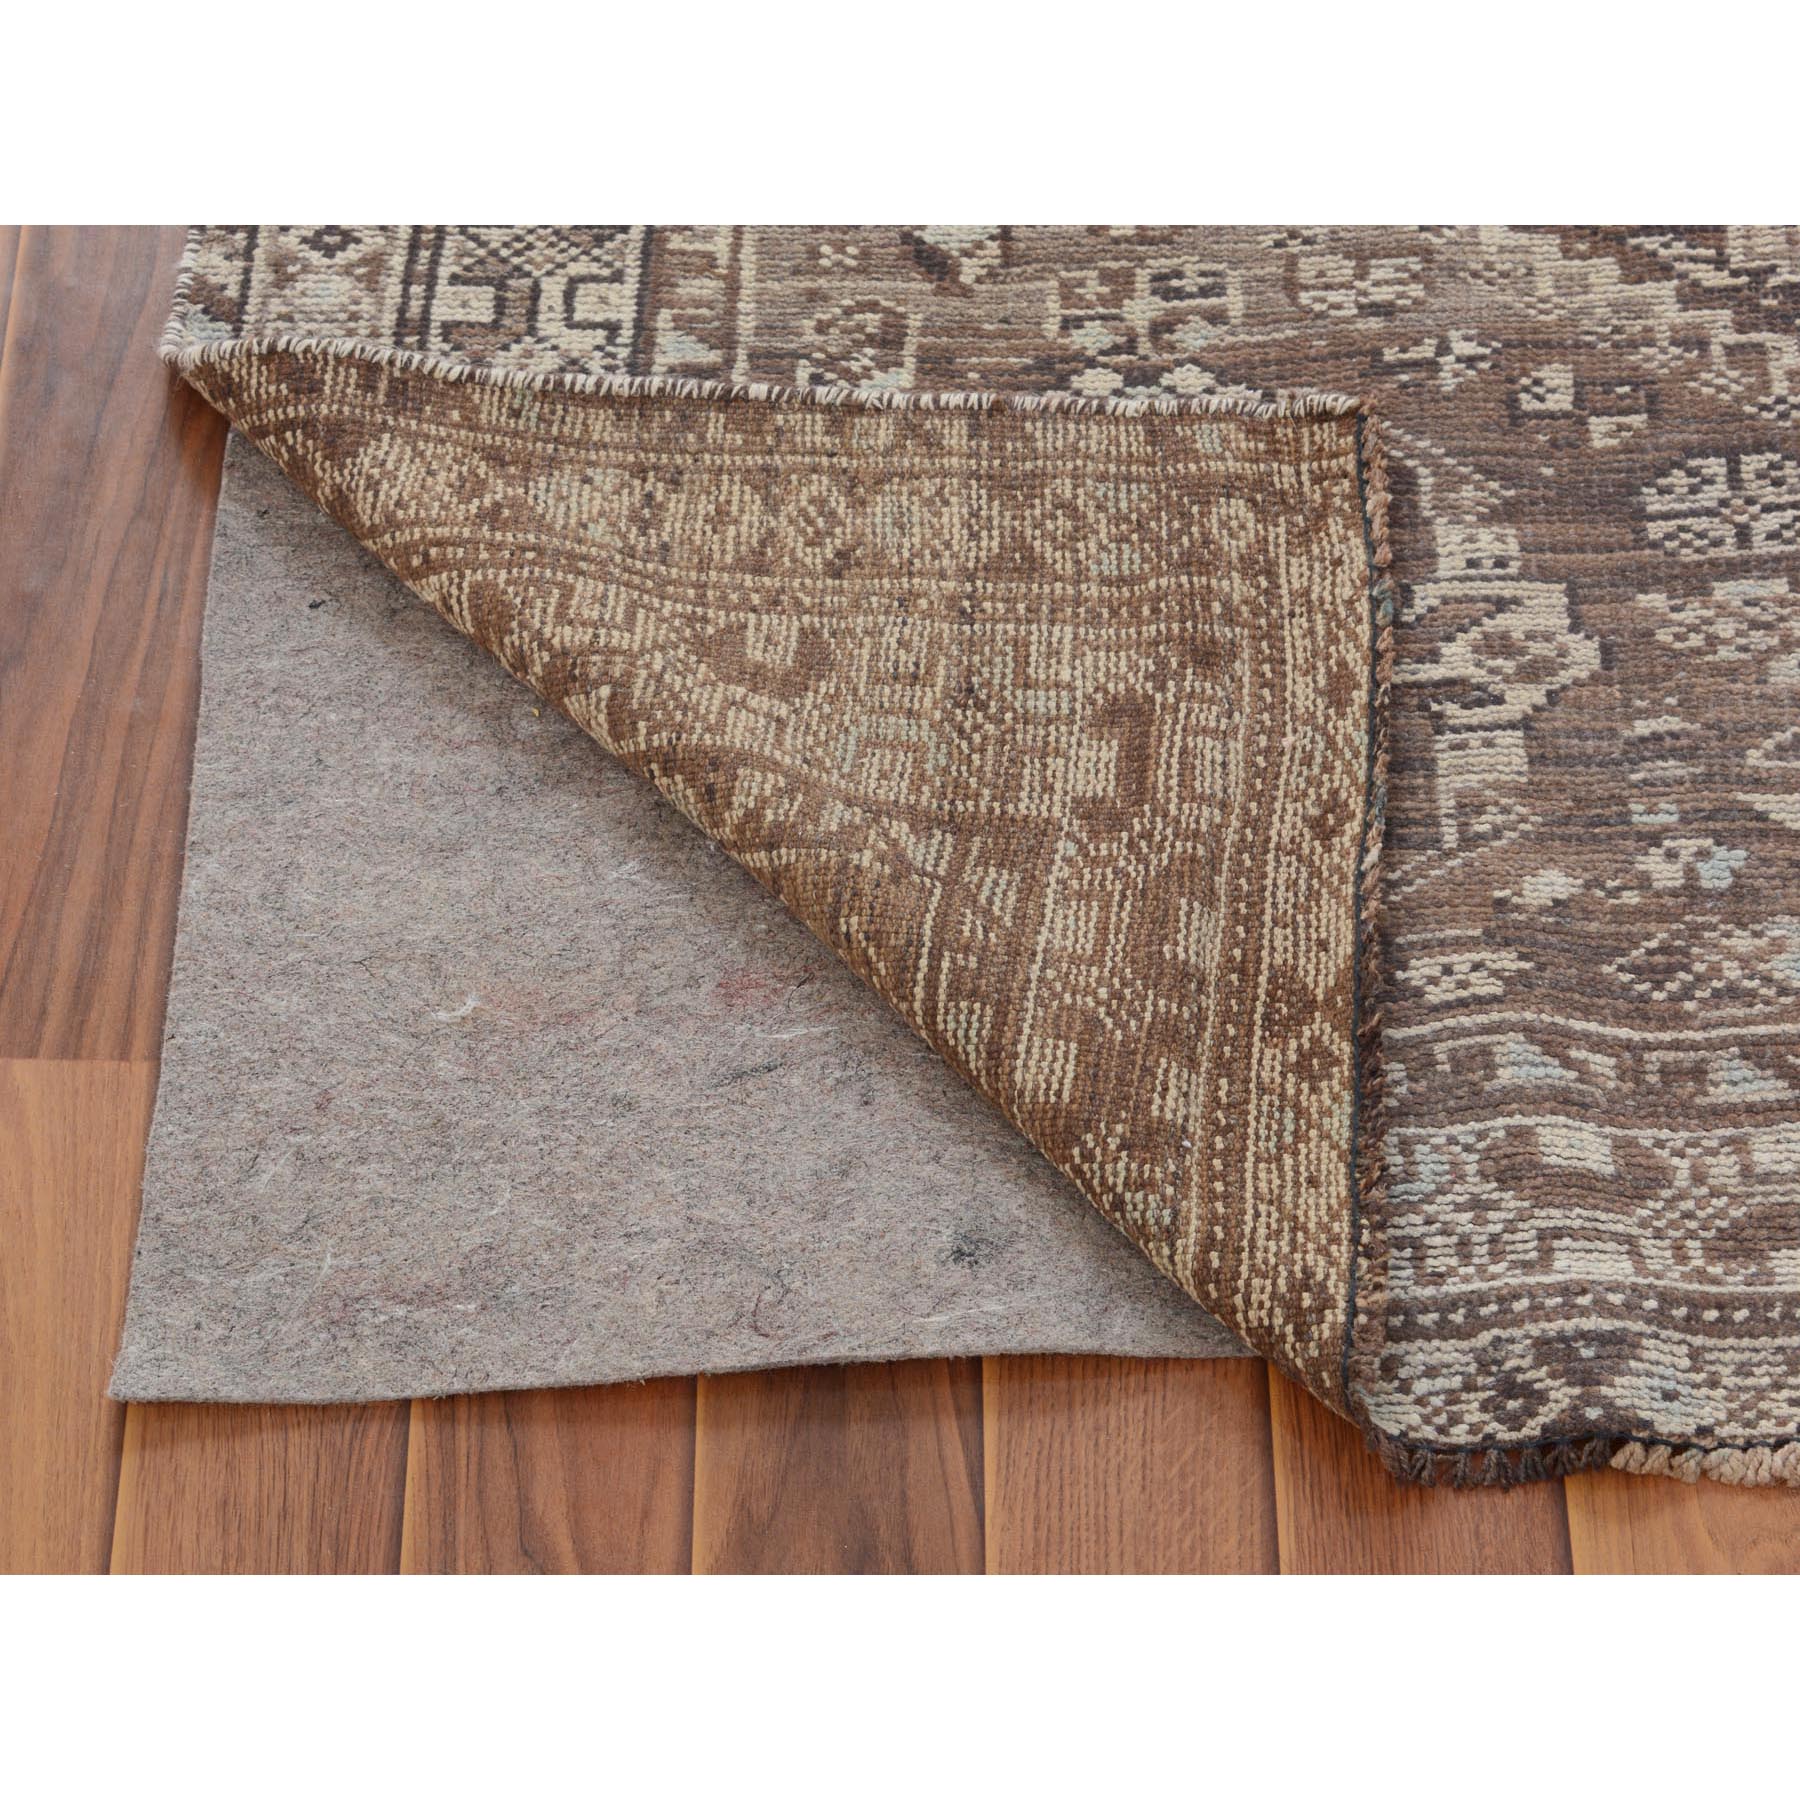 6-4 x8-10  Brown Old And Worn Down Persian Qashqai Pure Wool Hand Knotted Oriental Rug 